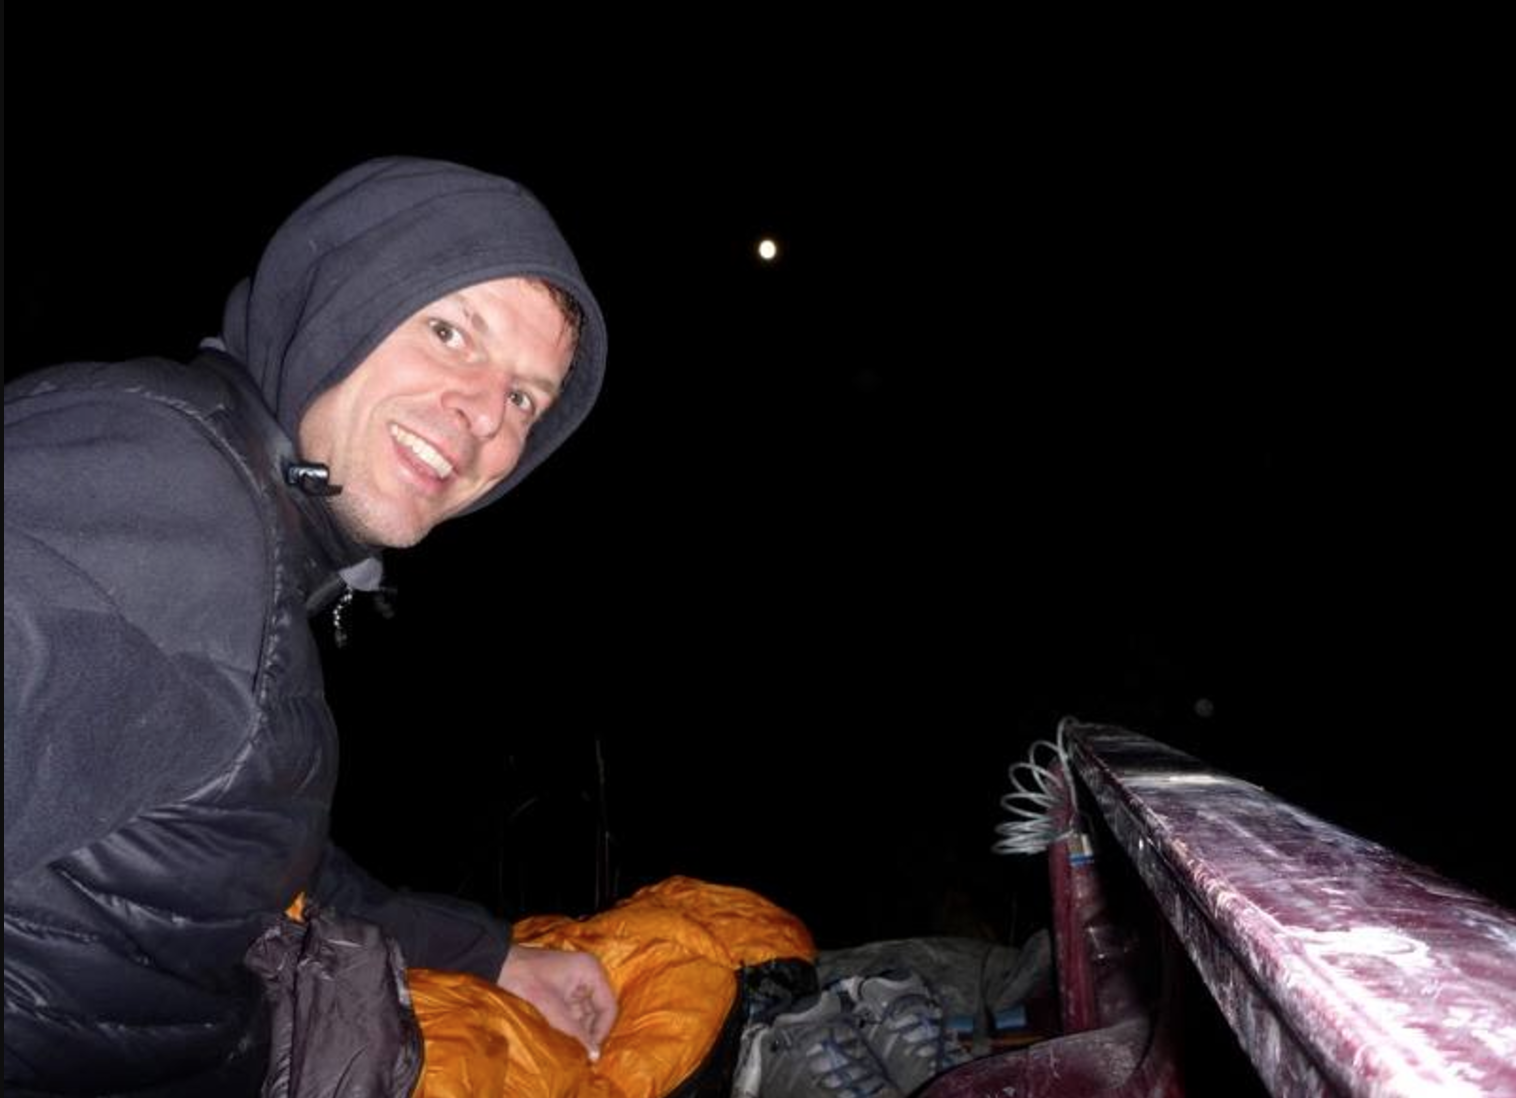 Full moon sleep-out in the back of Lucy before an alpine start to put up a new rock climbing route.